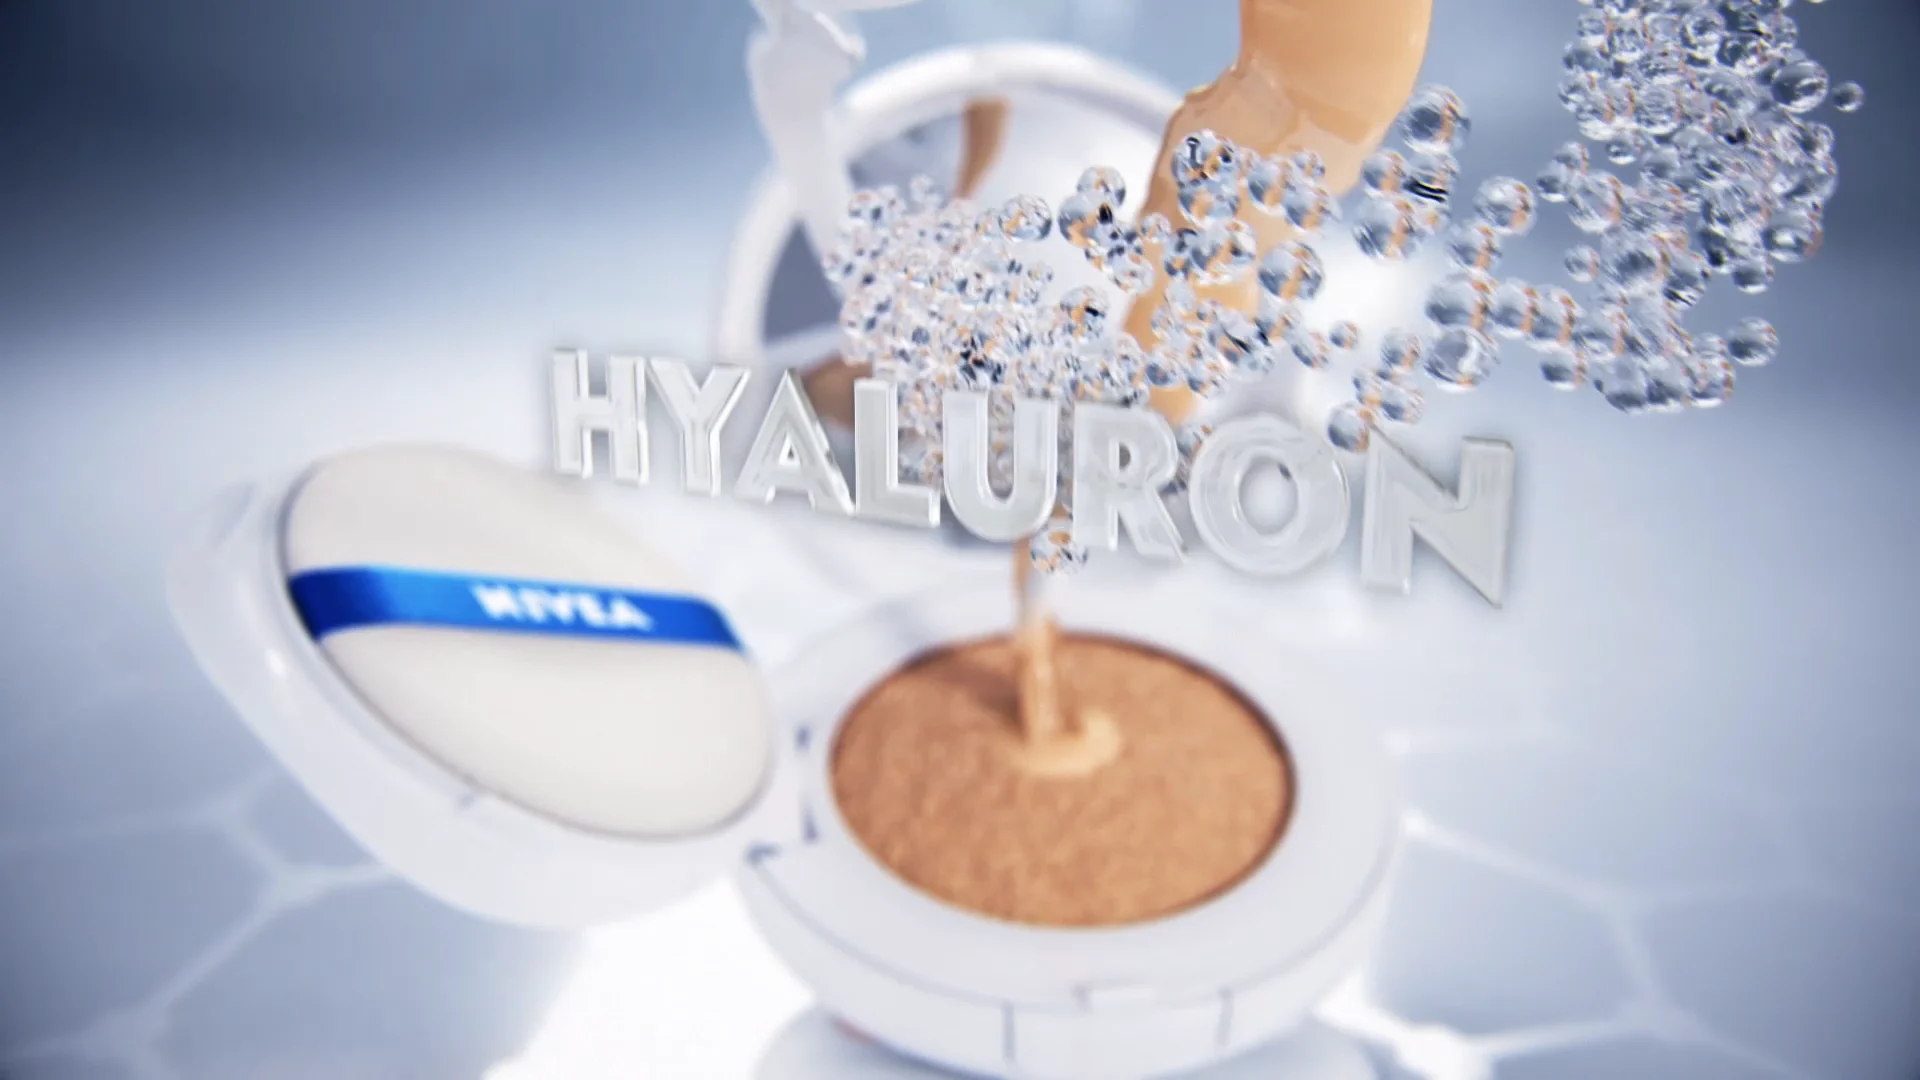 a nivea make up packshot which is opened and the ingredients are falling into the cushion. the ingredients are brown liquid, a white liquid and blueish bubbles. the word HYALURON is written into the air in front of the packshot